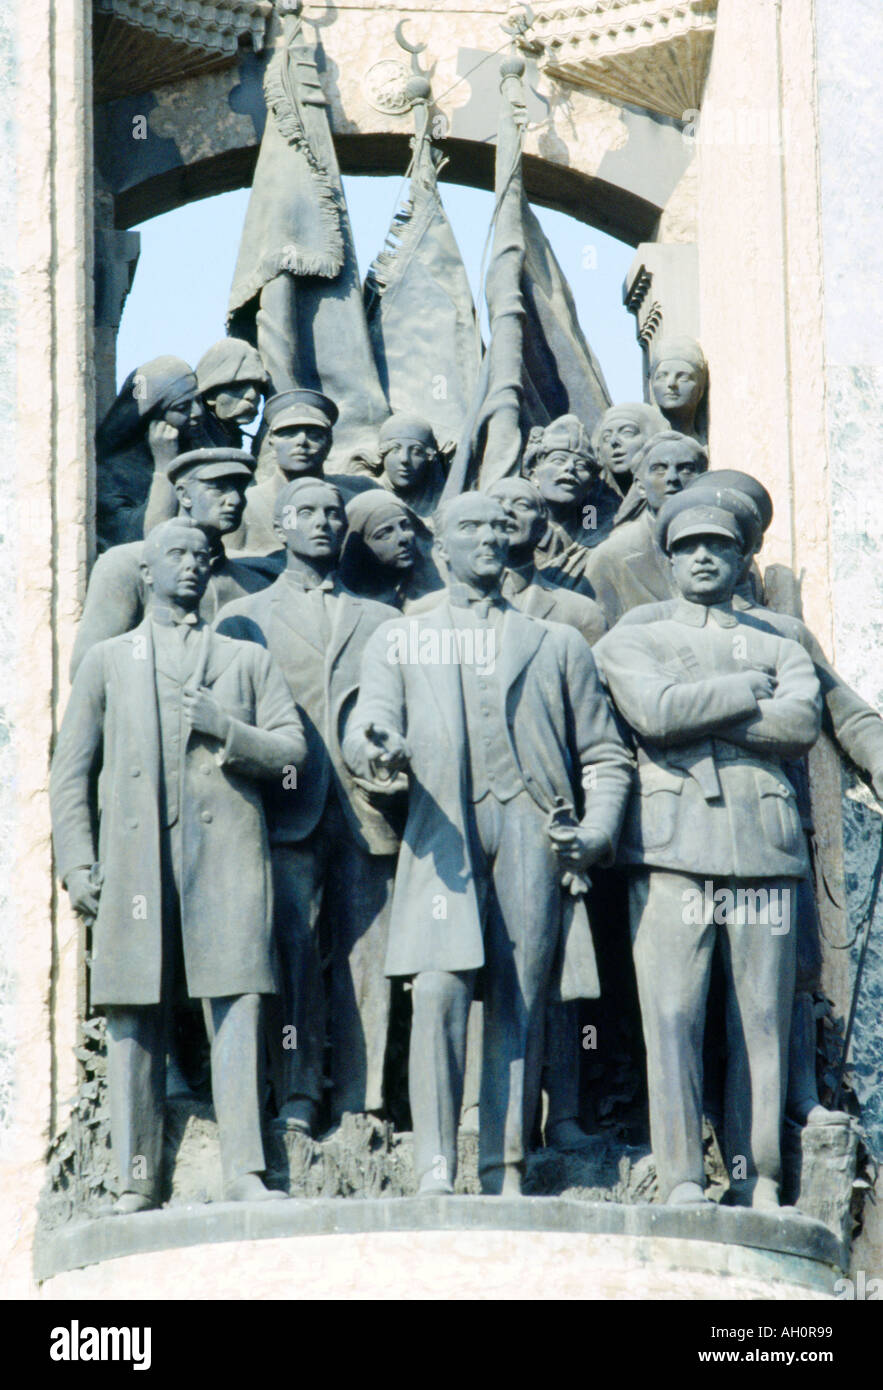 Istanbul Turkey Republic Monument on Taksim Square to Commemorate formation of the Turkish Republic with Mustafa Kemal Ataturk and Commorades in Weste Stock Photo